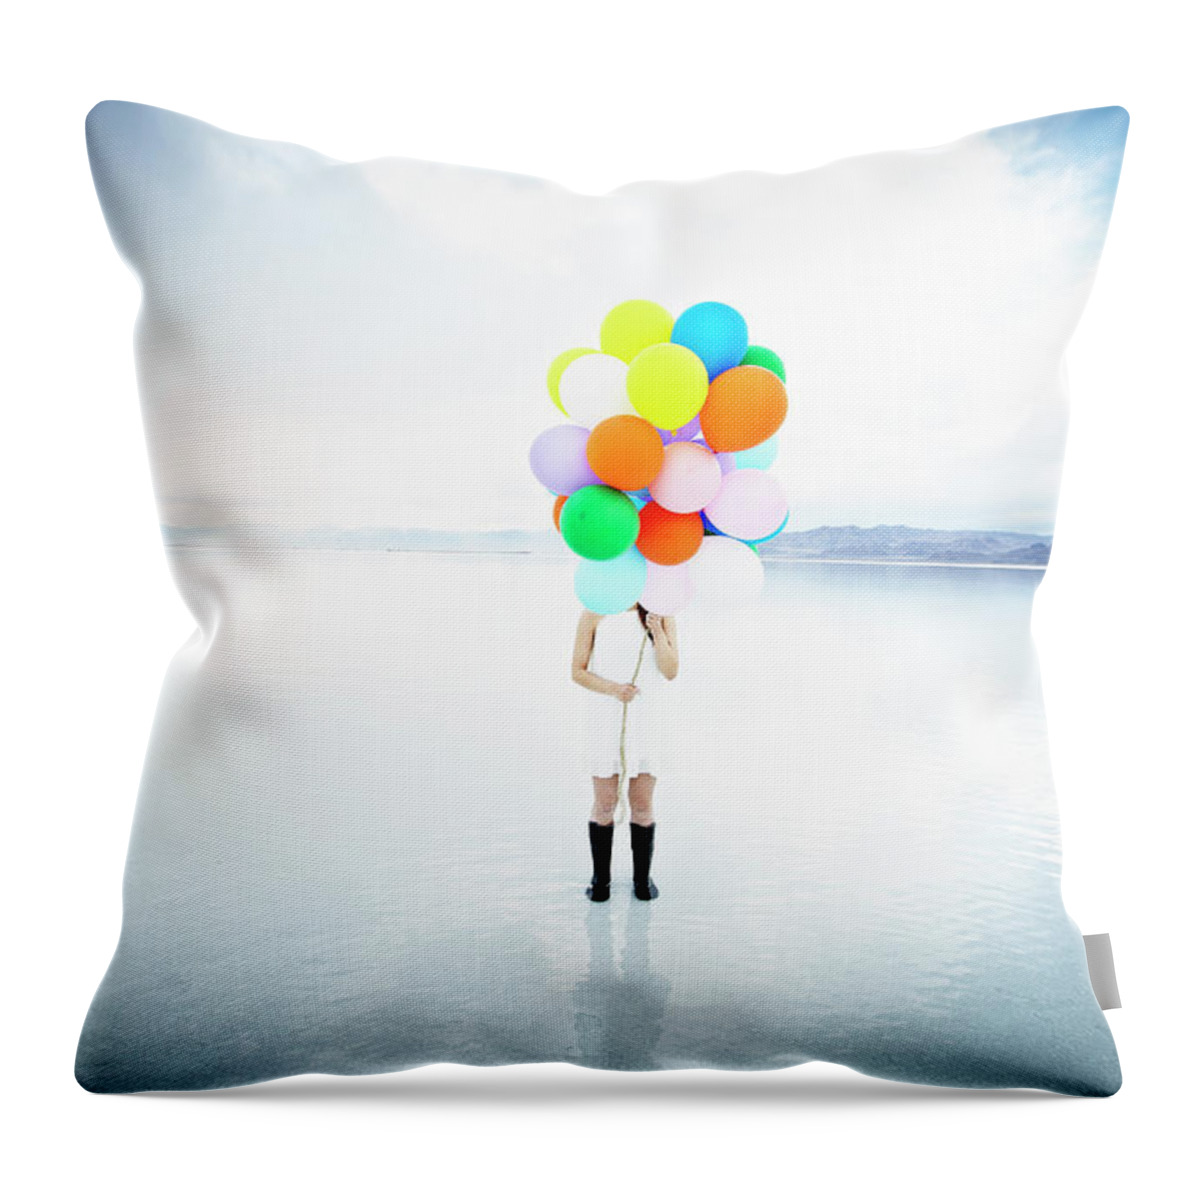 Scenics Throw Pillow featuring the photograph Woman In Water Standing Behind Balloons by Thomas Barwick